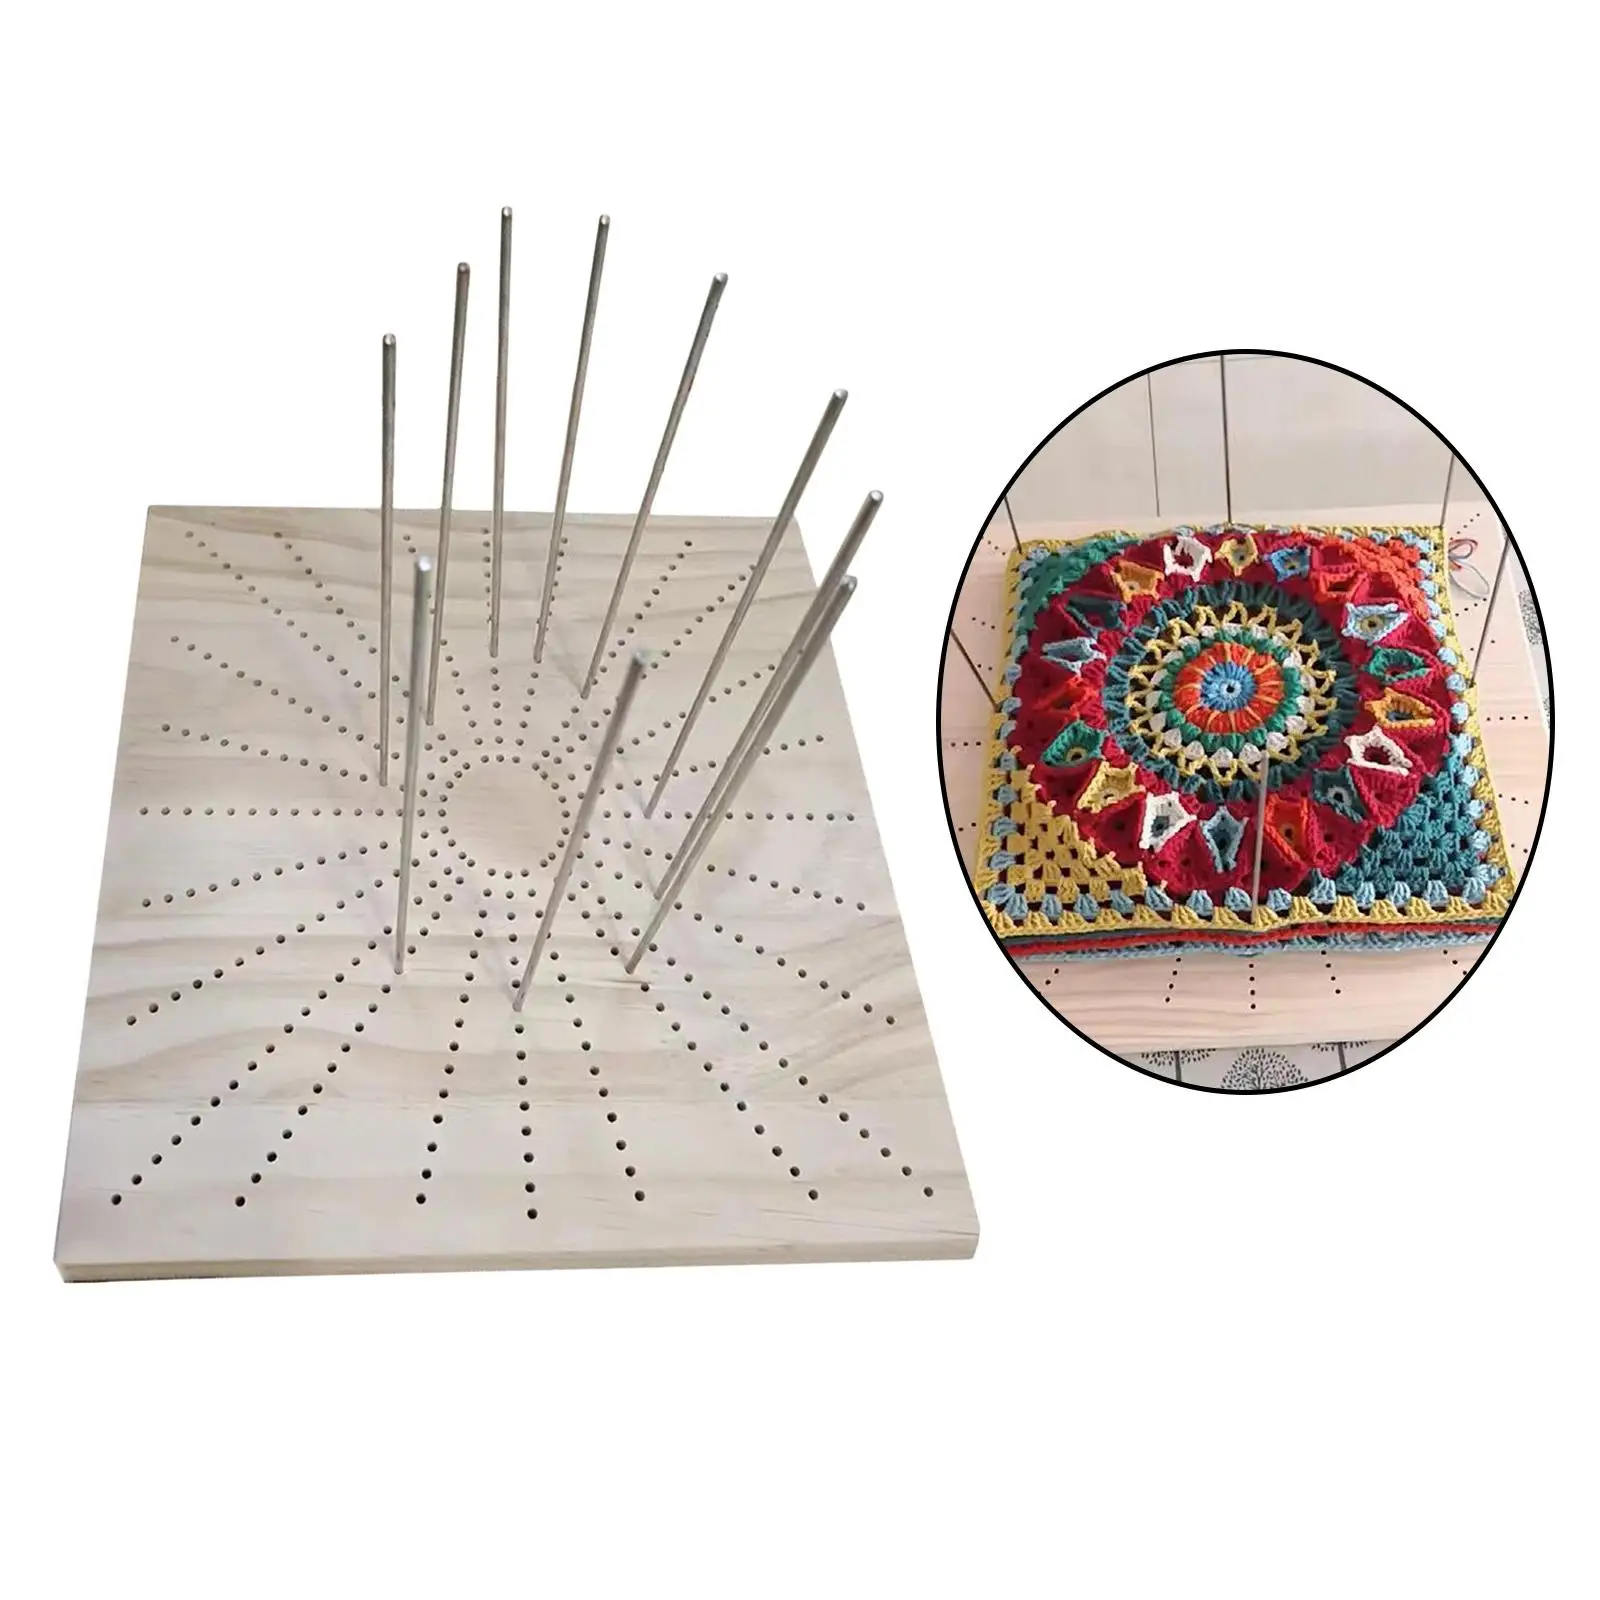 Crochet Blocking Board Unlimited Usages Wooden for Knitting and Crocheting